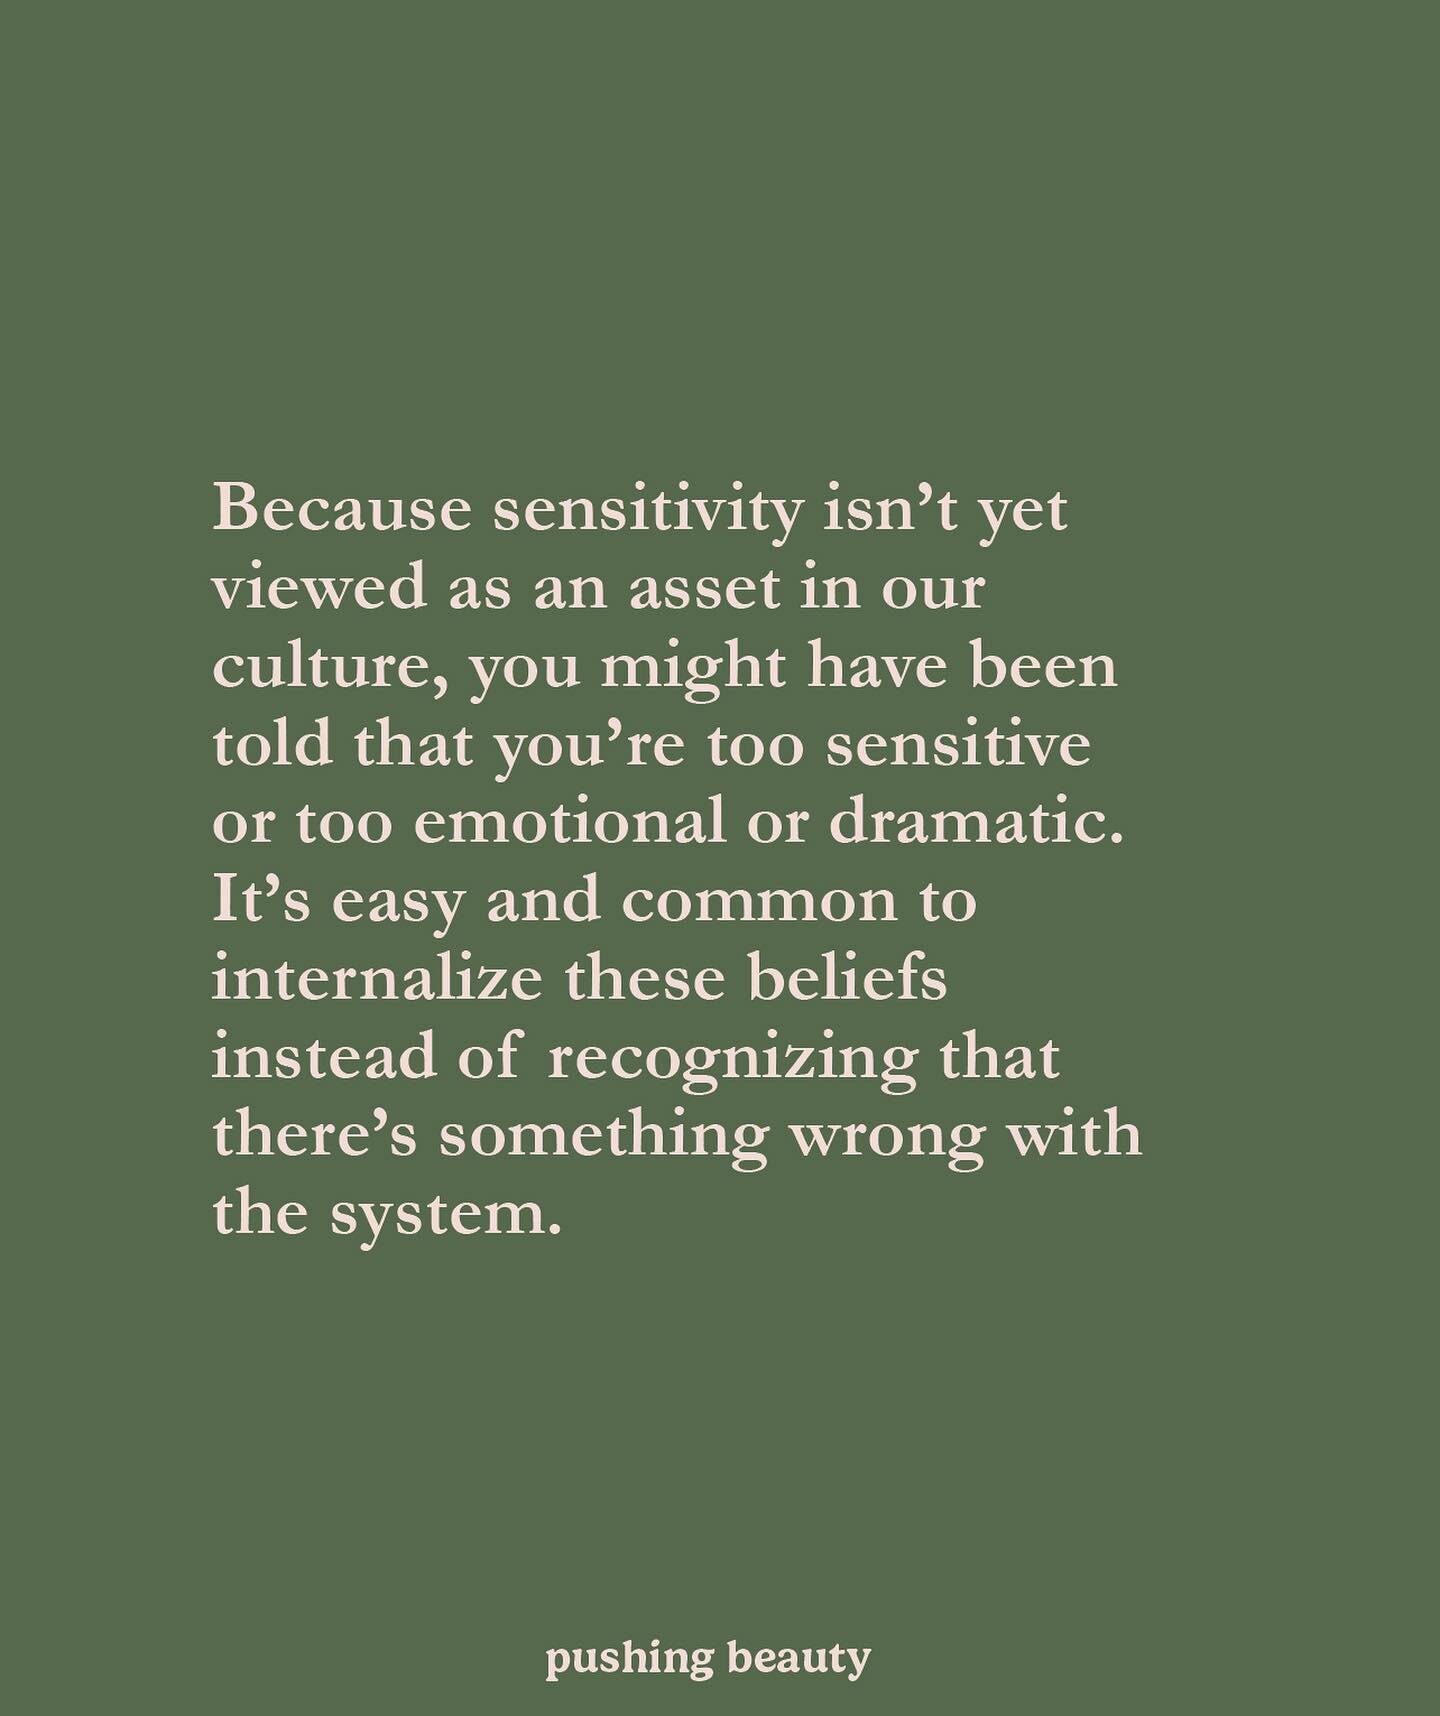 Because sensitivity isn&rsquo;t yet viewed as an asset in our culture, you might have been told that you&rsquo;re too sensitive or too emotional or dramatic. It&rsquo;s easy and common to internalize these beliefs instead of recognizing that there&rs